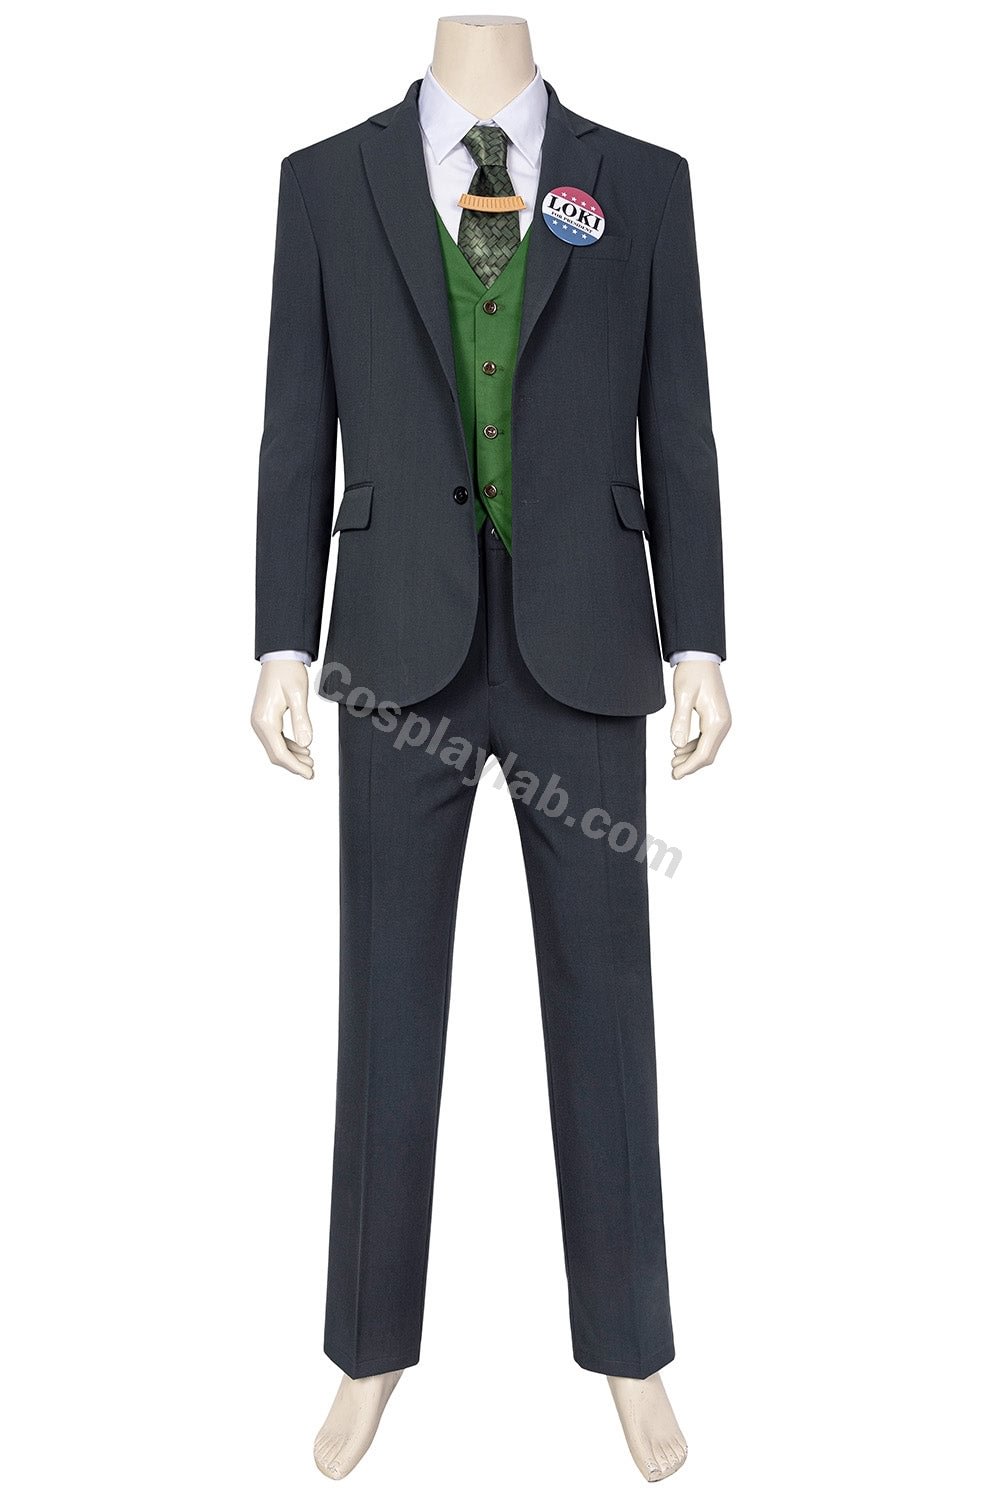 LOKI Cosplay Costumes 2021 New LOKI Cosplay Suit By CosplayLab